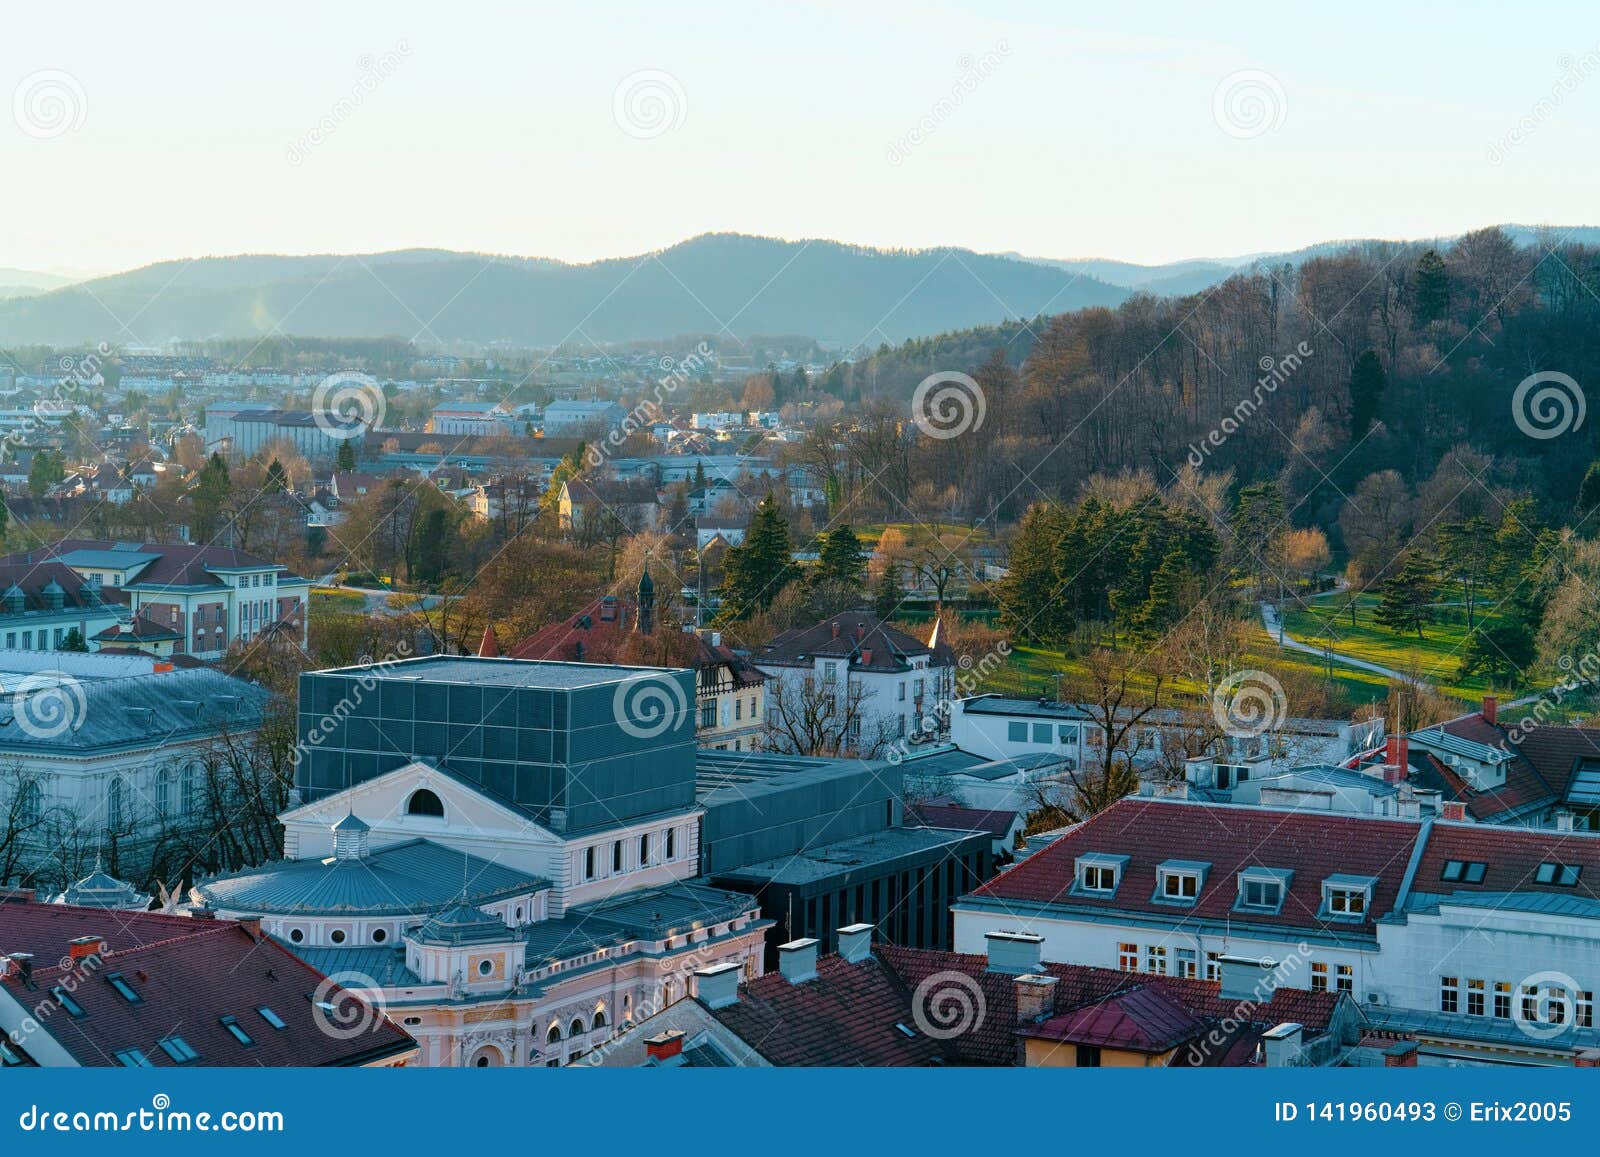 Beautiful Sunset with Ljubljana Old Town and Nature Stock Image - Image of triglav, 141960493